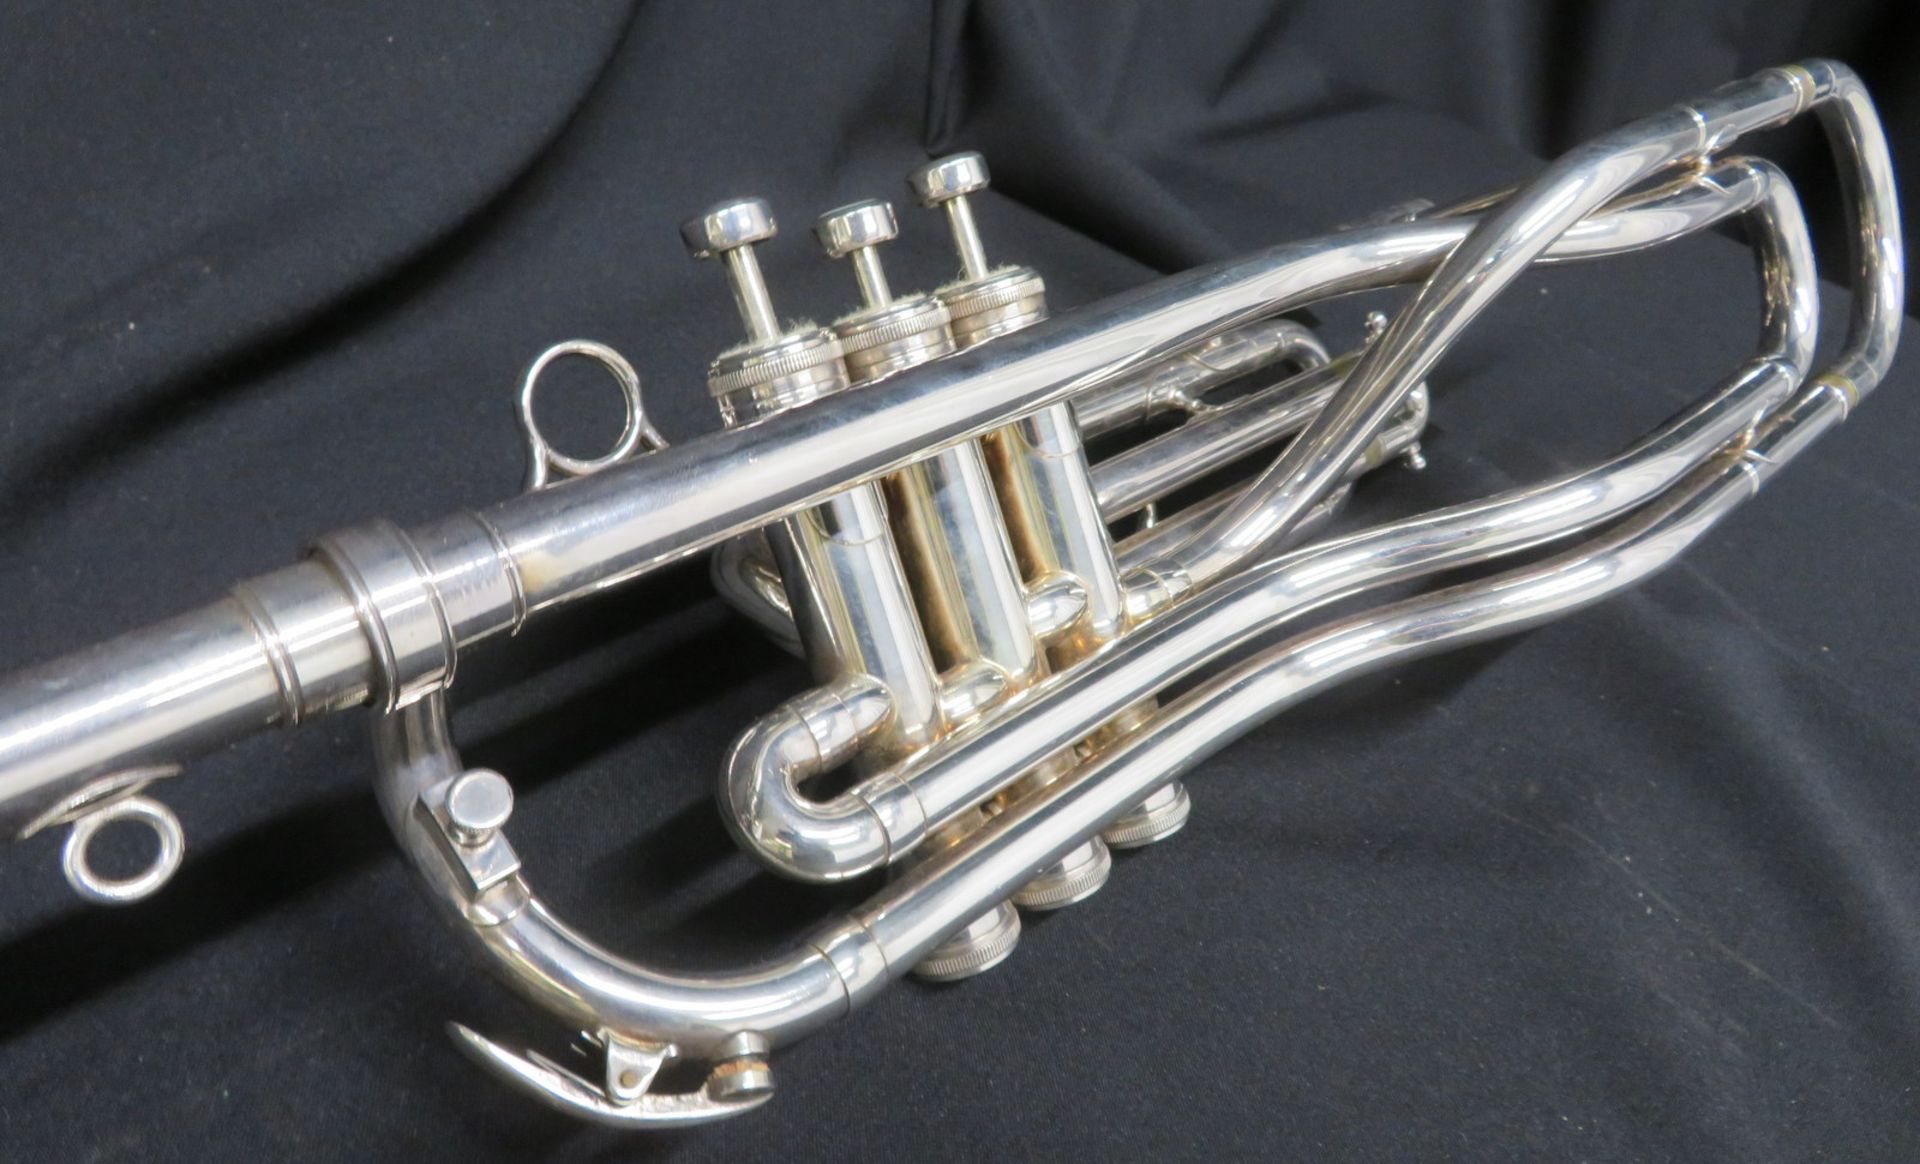 Boosey & Hawkes Besson 700 London tenor fanfare trumpet with case. Serial number: 707-721126. - Image 8 of 18